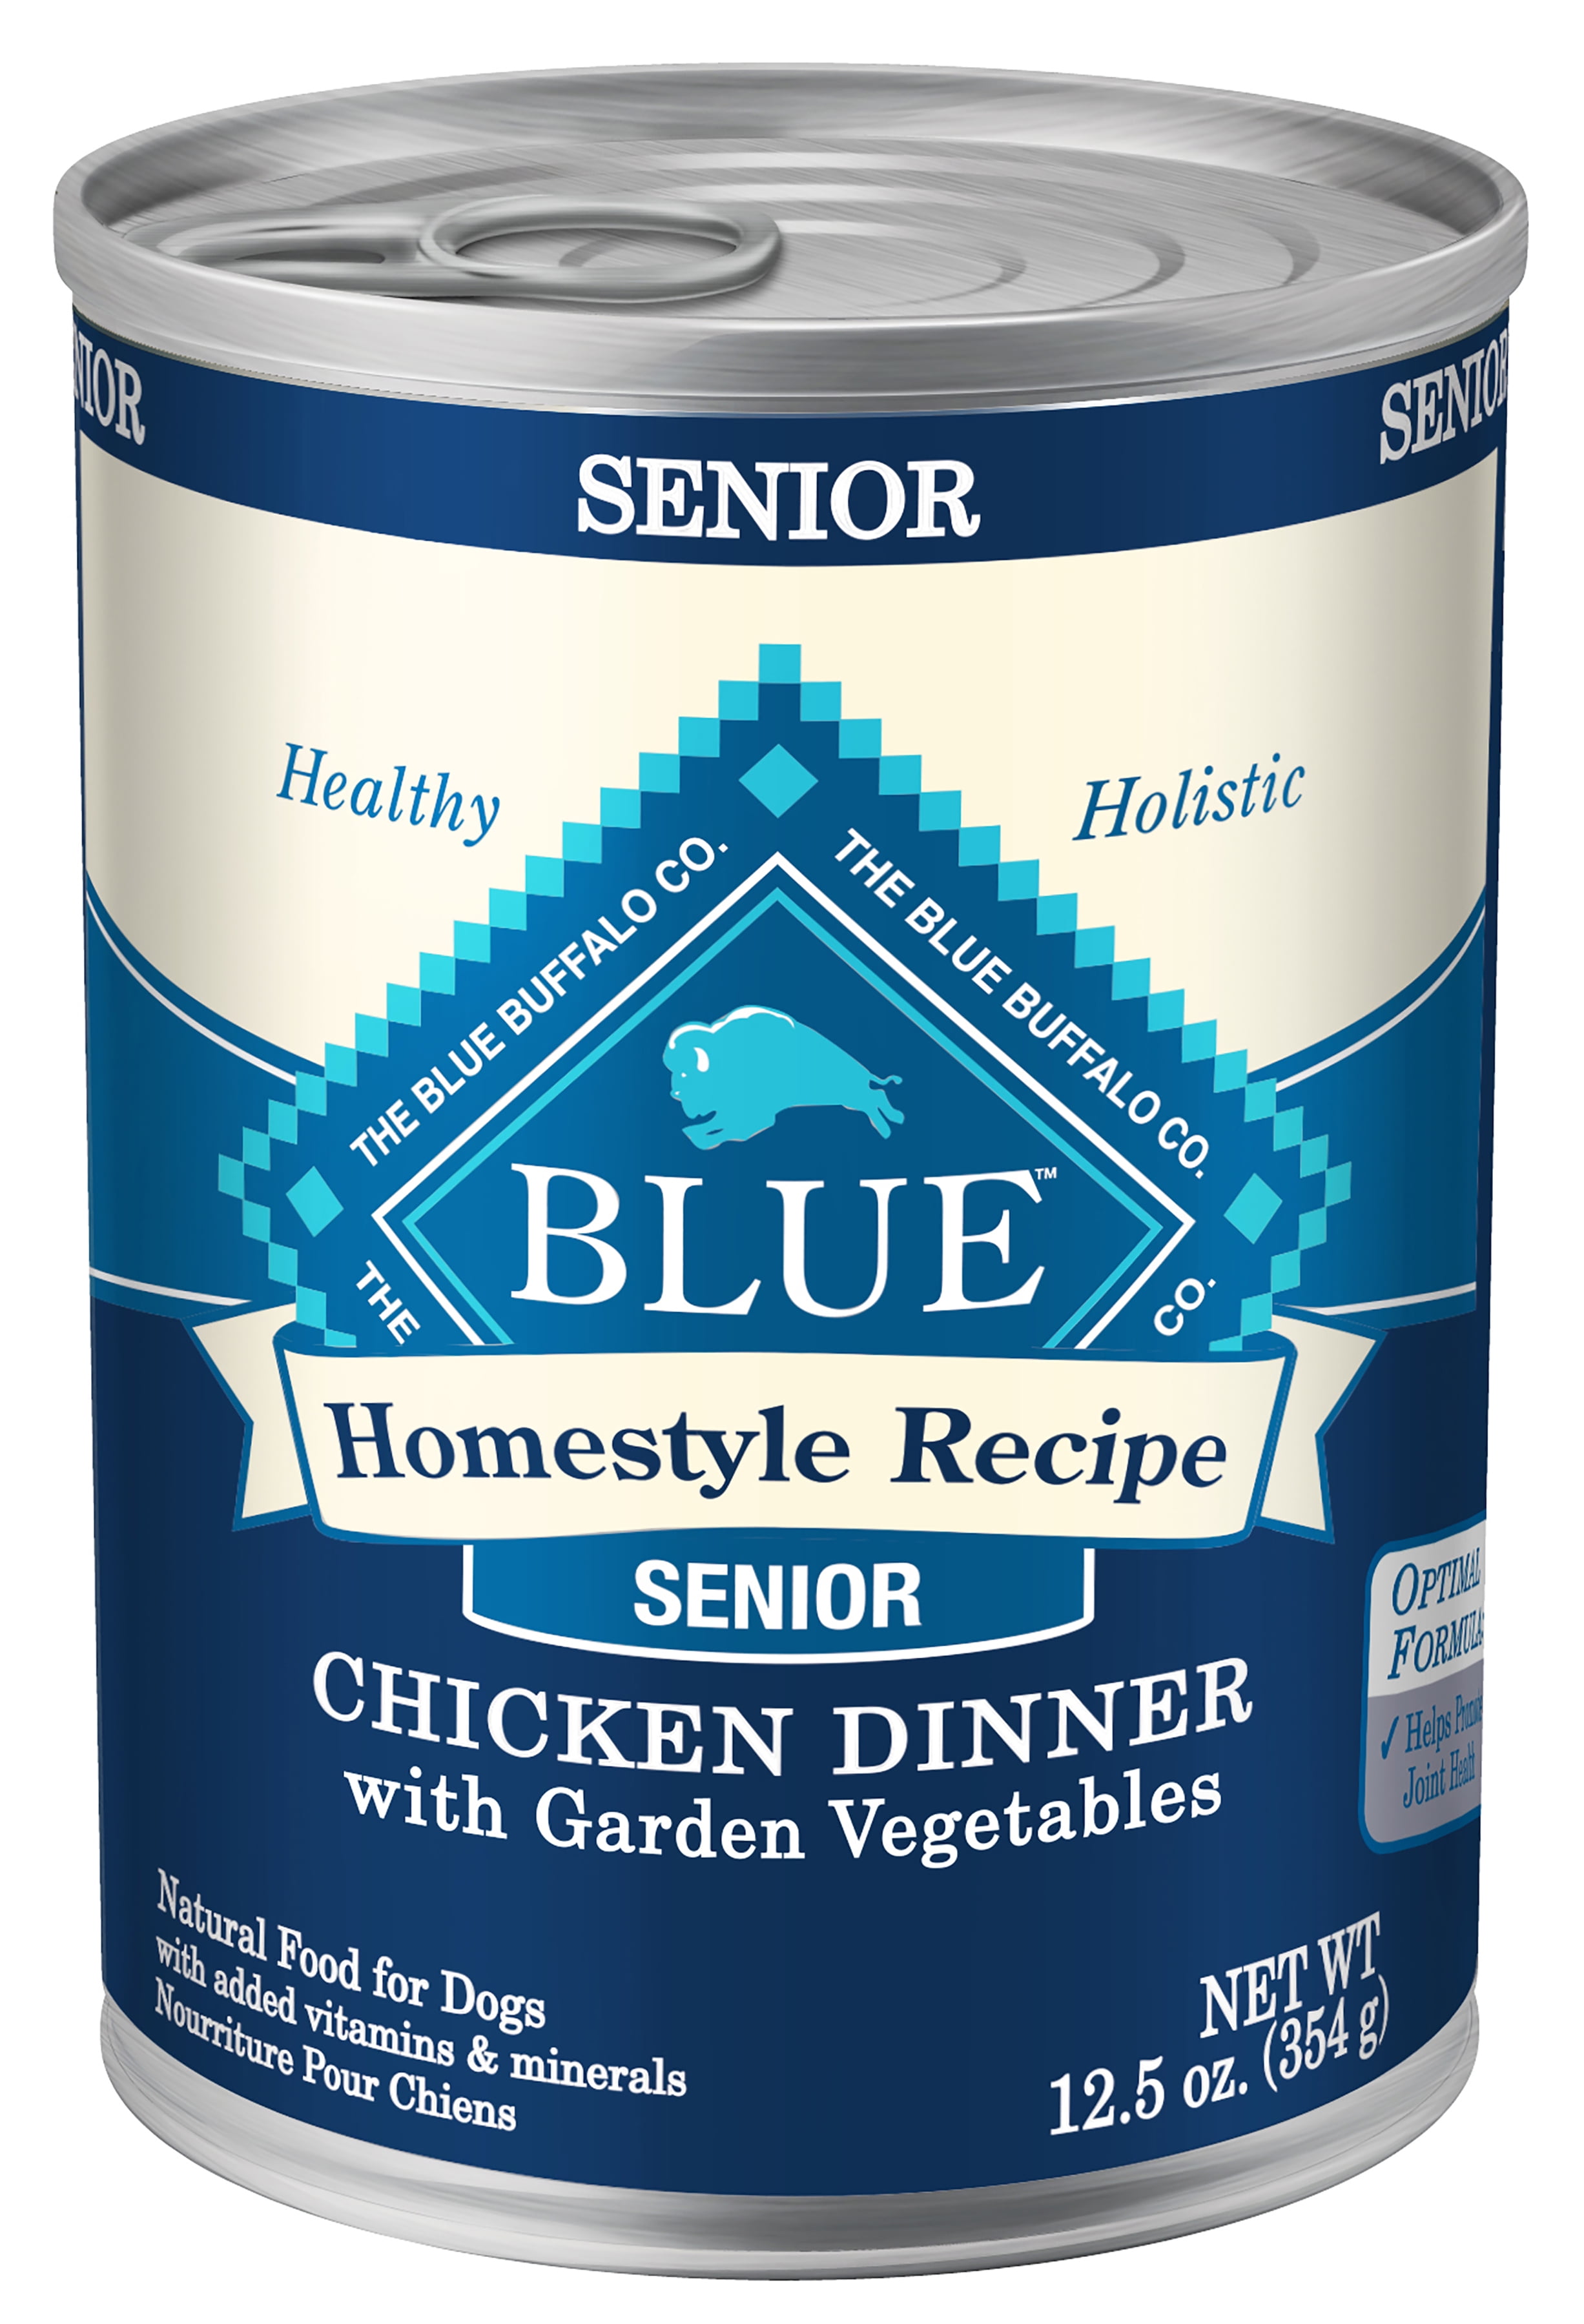 Blue Buffalo Homestyle Recipe Chicken Pate Wet Dog Food for Senior Dogs, Whole Grain, 12.5 oz. Can